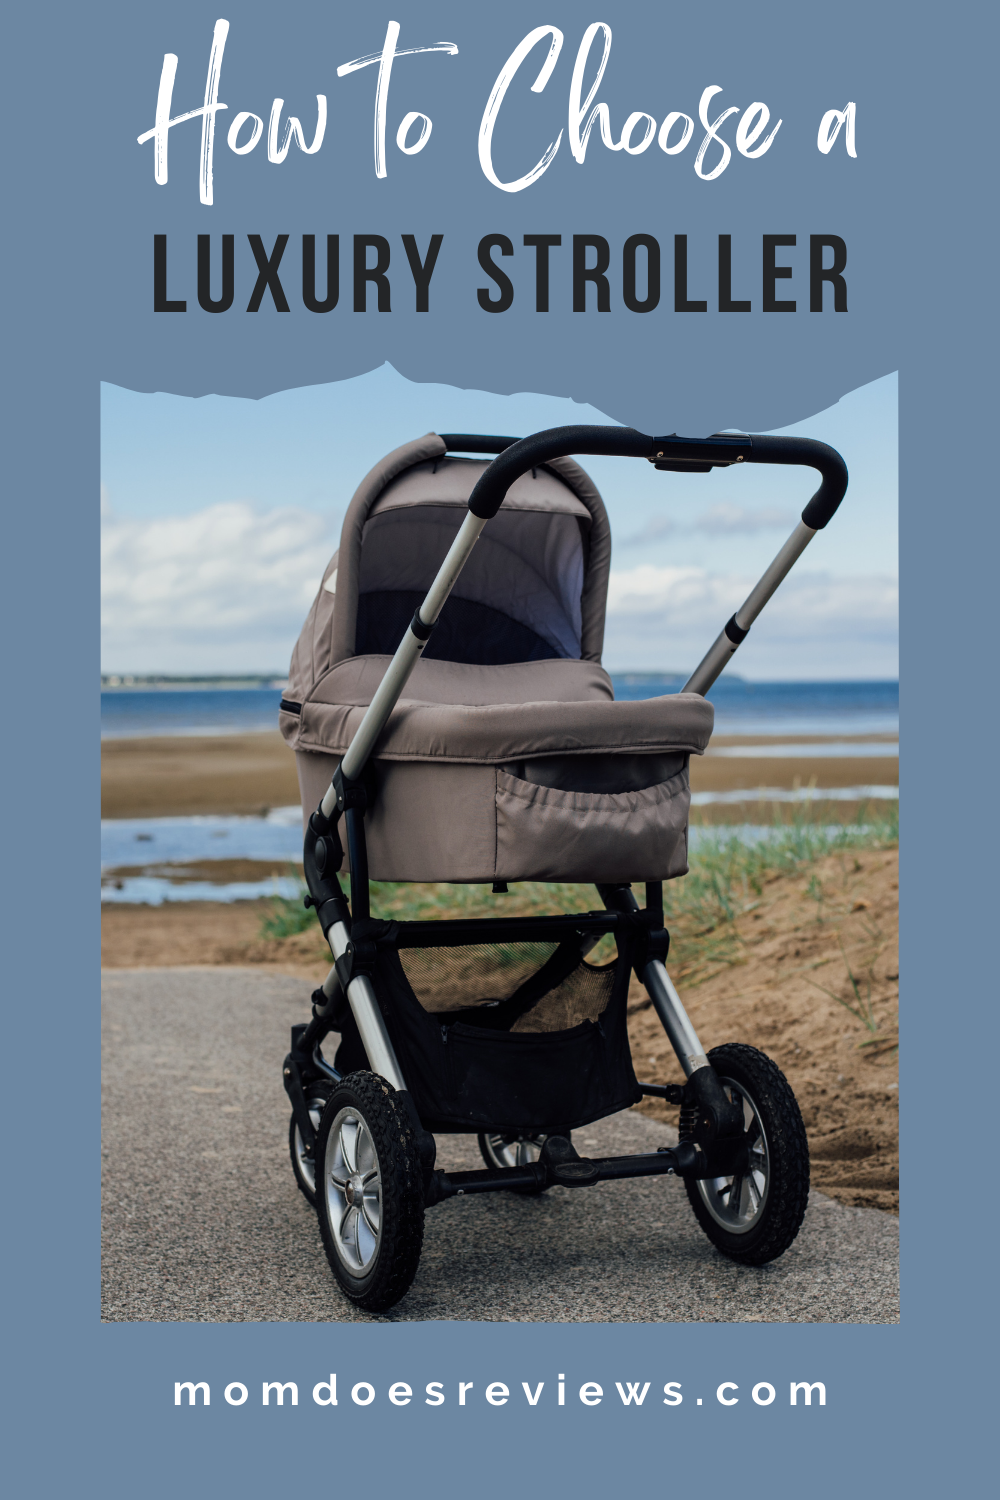 How to Choose A Luxury Stroller